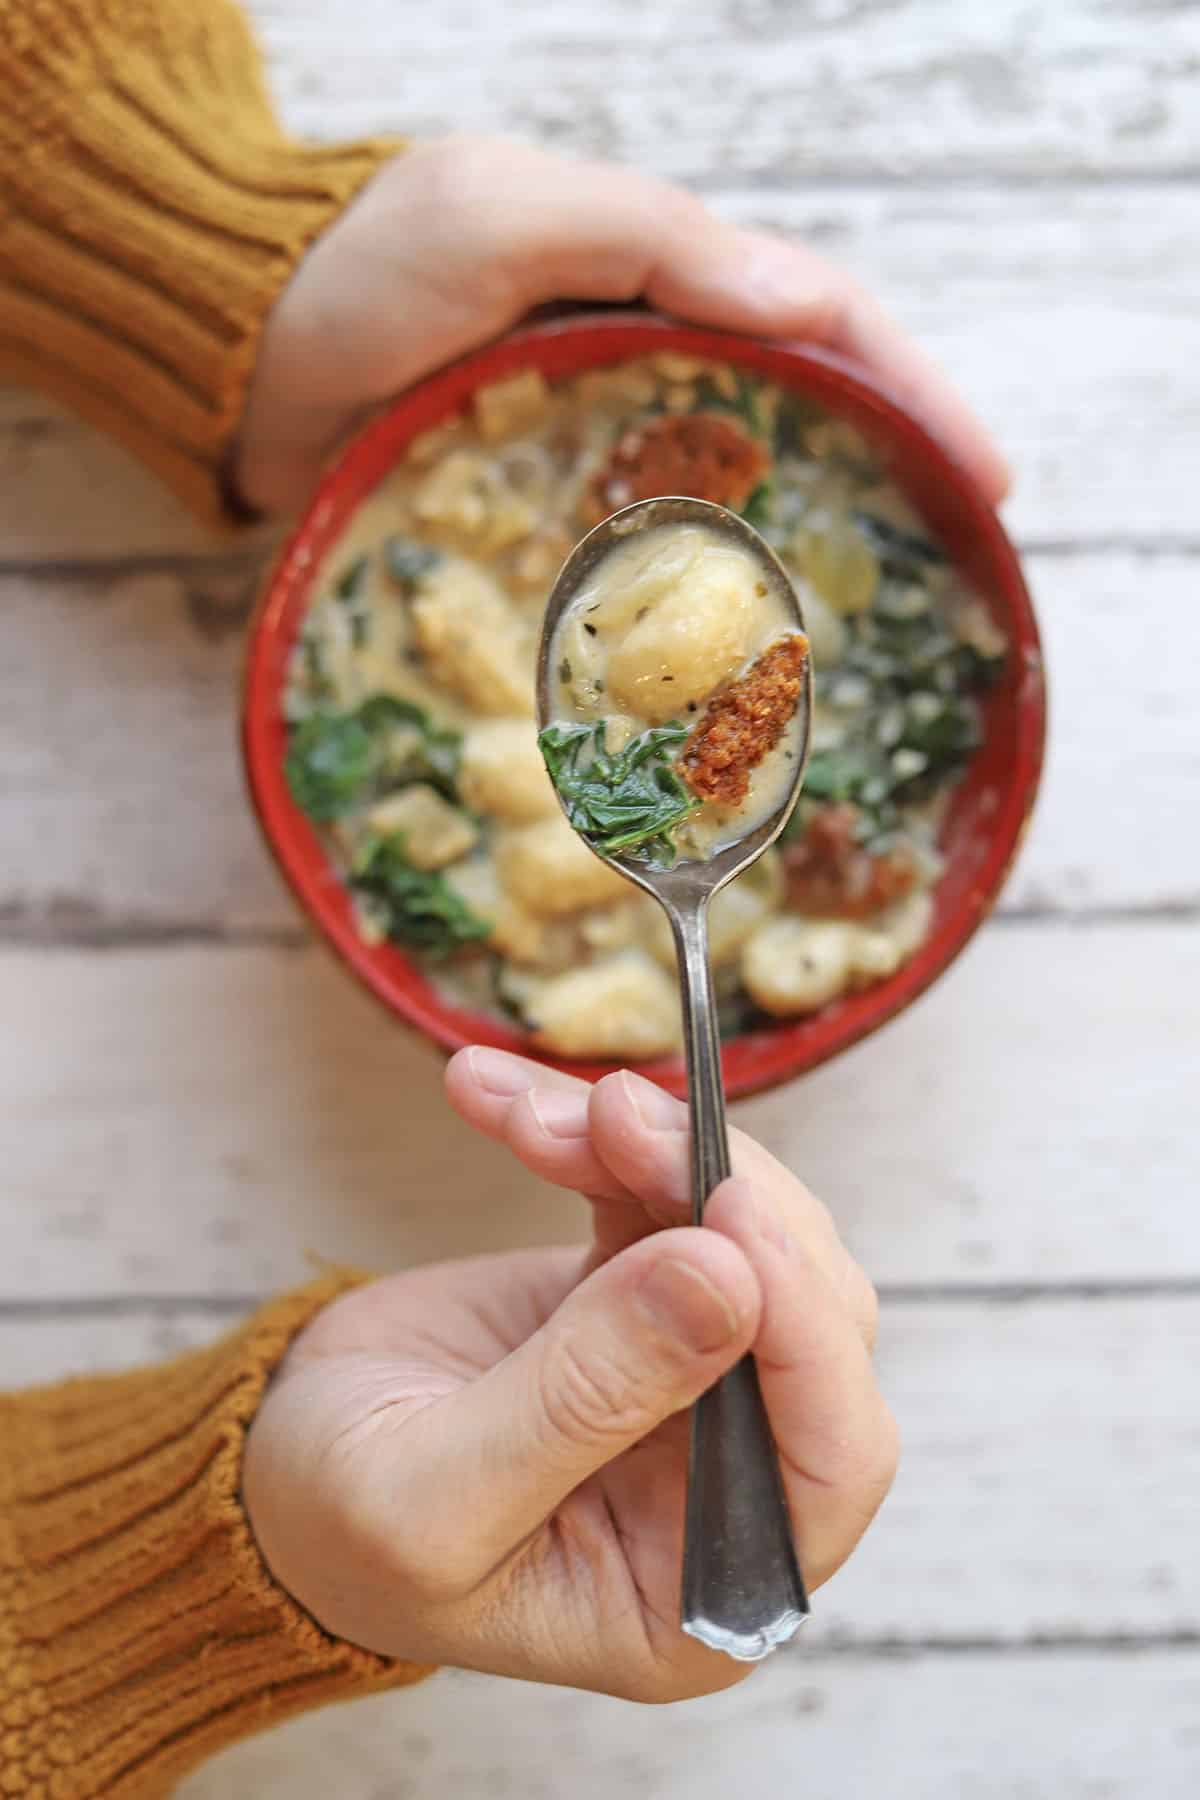 Spoon hovering over bowl of soup.